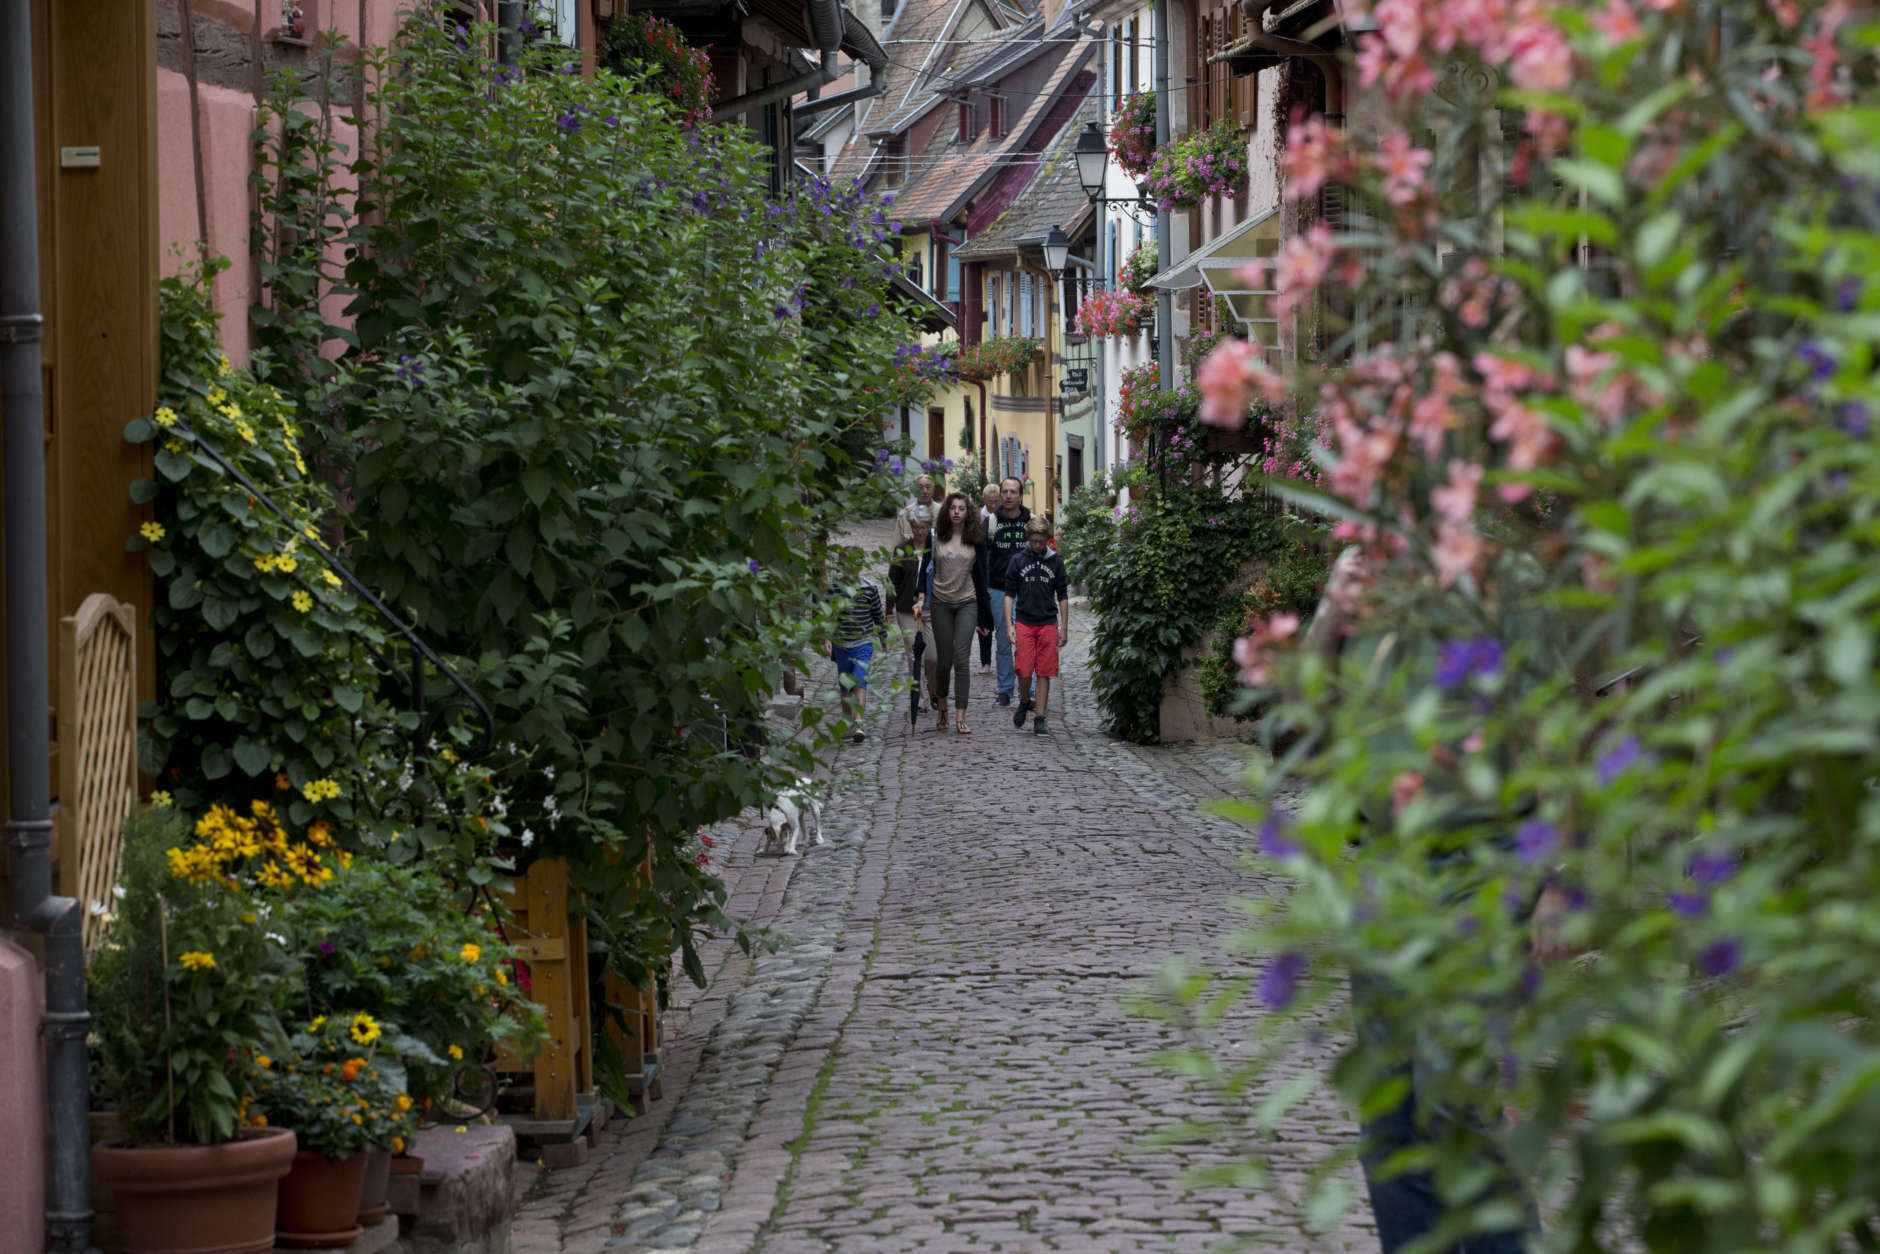 People take a stroll in the village of Eguisheim in France's north-eastern Alsace region where the ninth stage of the Tour de France cycling race over 170 kilometers (105.6 miles) with start in Gerardmer and finish in Mulhouse will take place Sunday, July 13, 2014. Eguisheim was voted Favorite French village of the year 2013. (AP Photo/Peter Dejong)